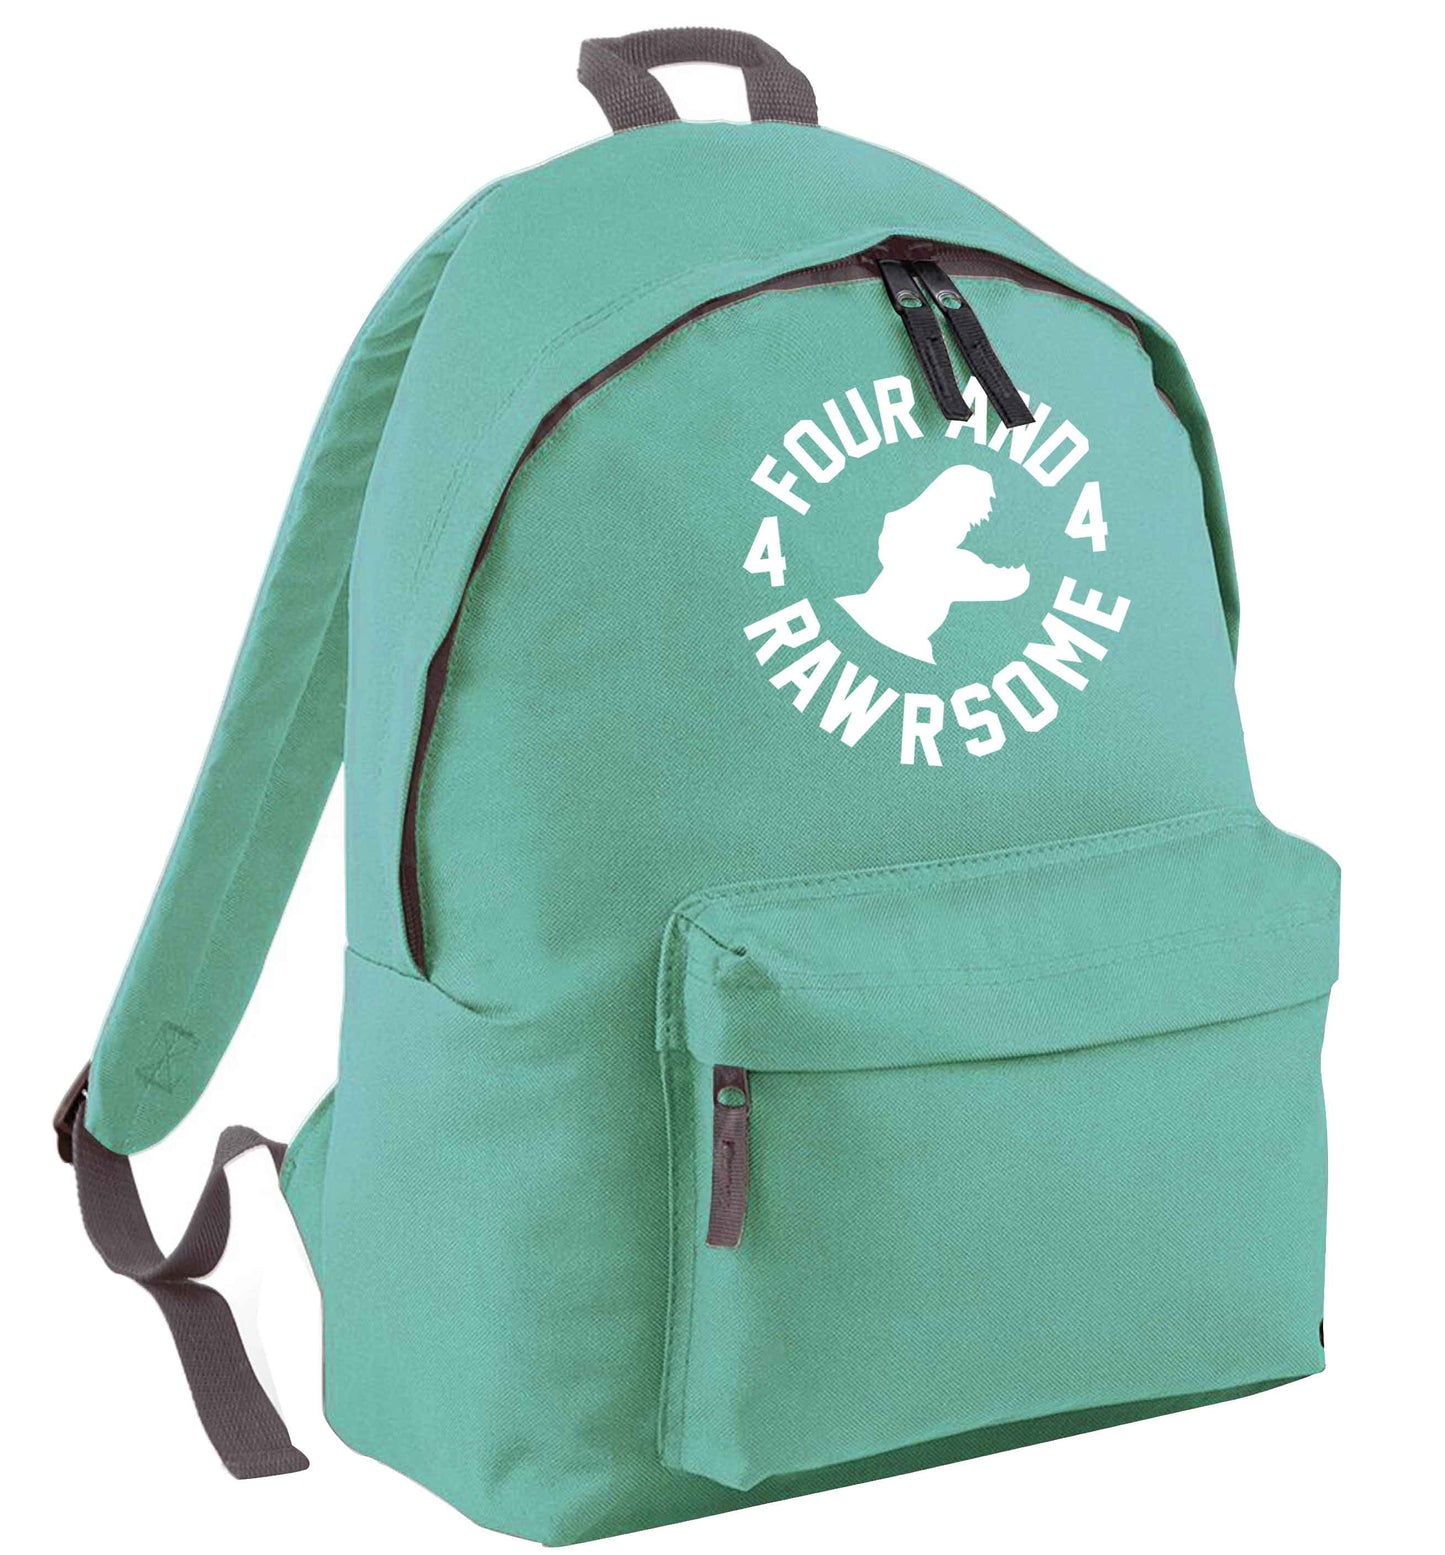 Four and rawrsome mint adults backpack